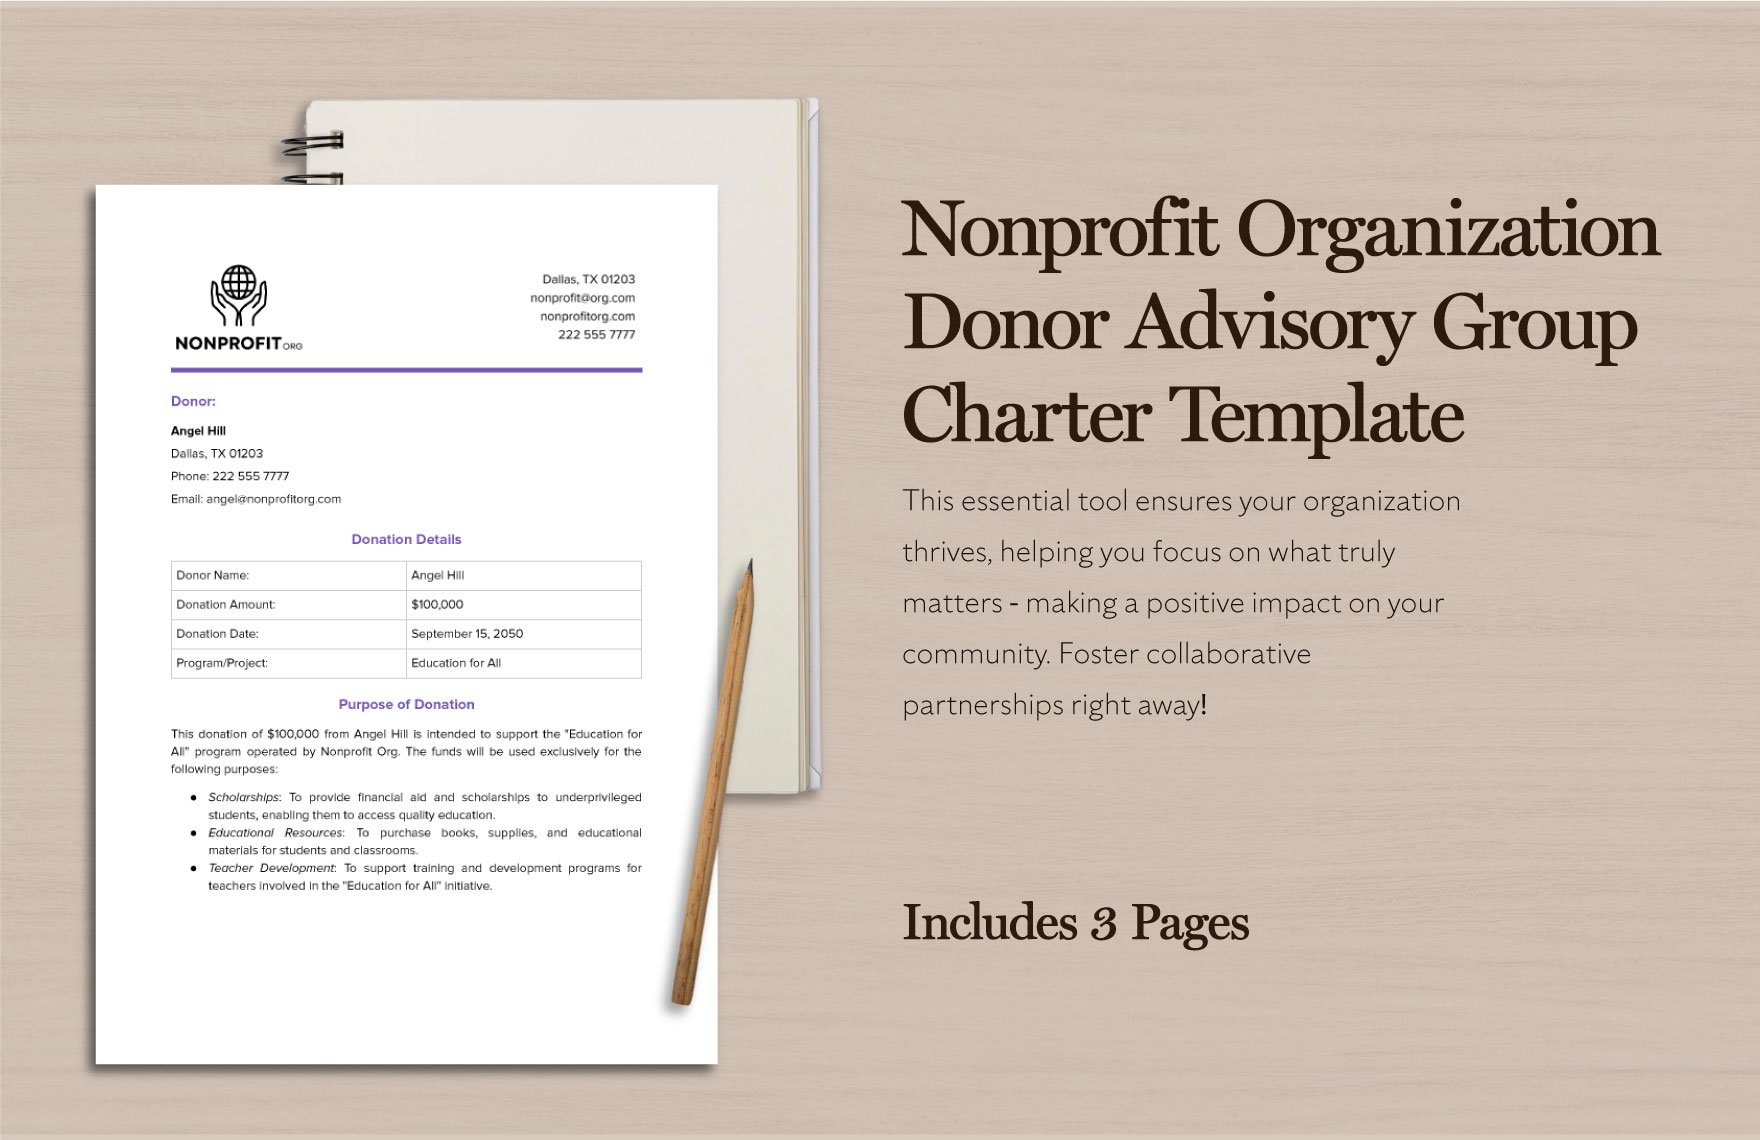 Free Nonprofit Organization Donor Advisory Group Charter Template in Word, Google Docs, PDF